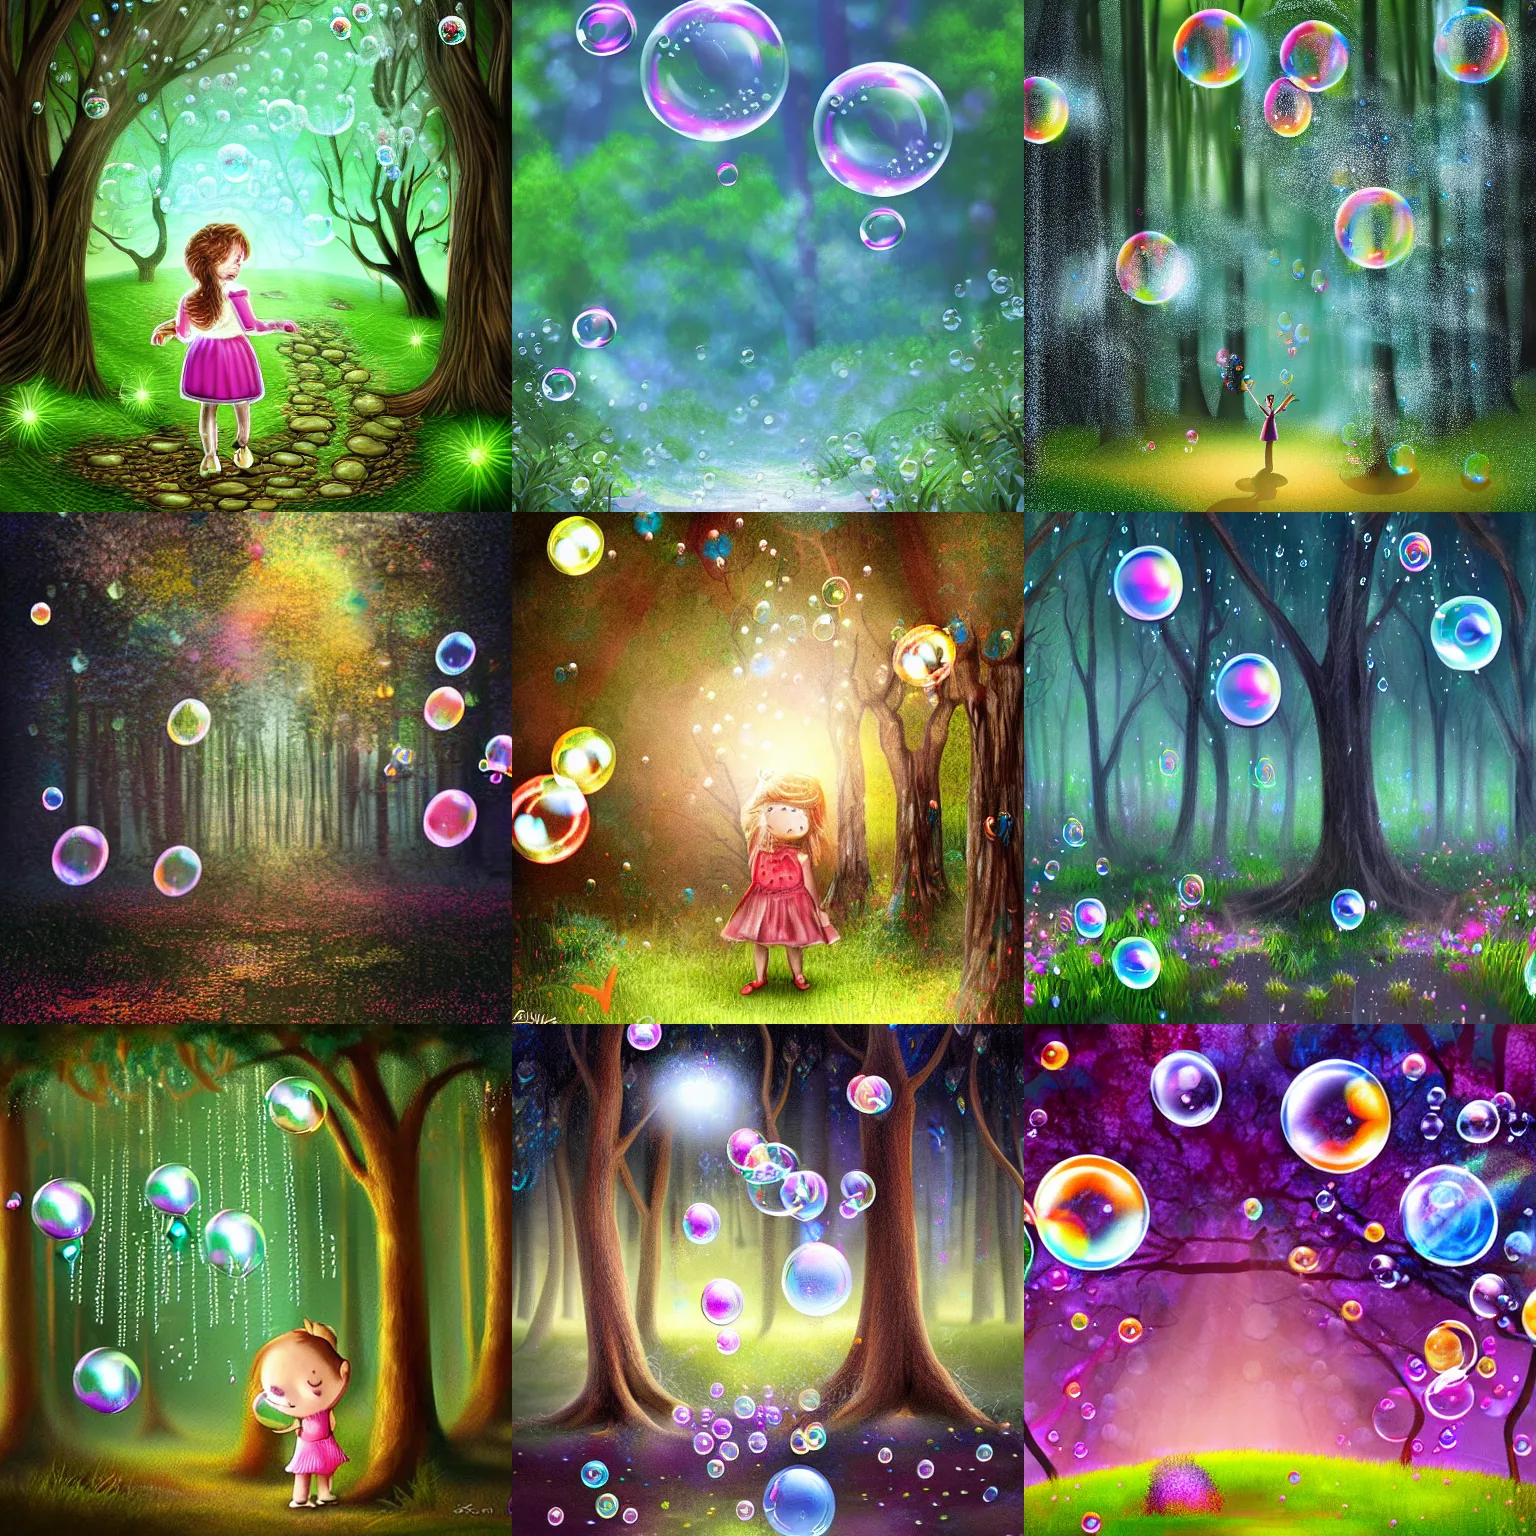 Prompt: It's raining bubbles in a magical forest, digital art